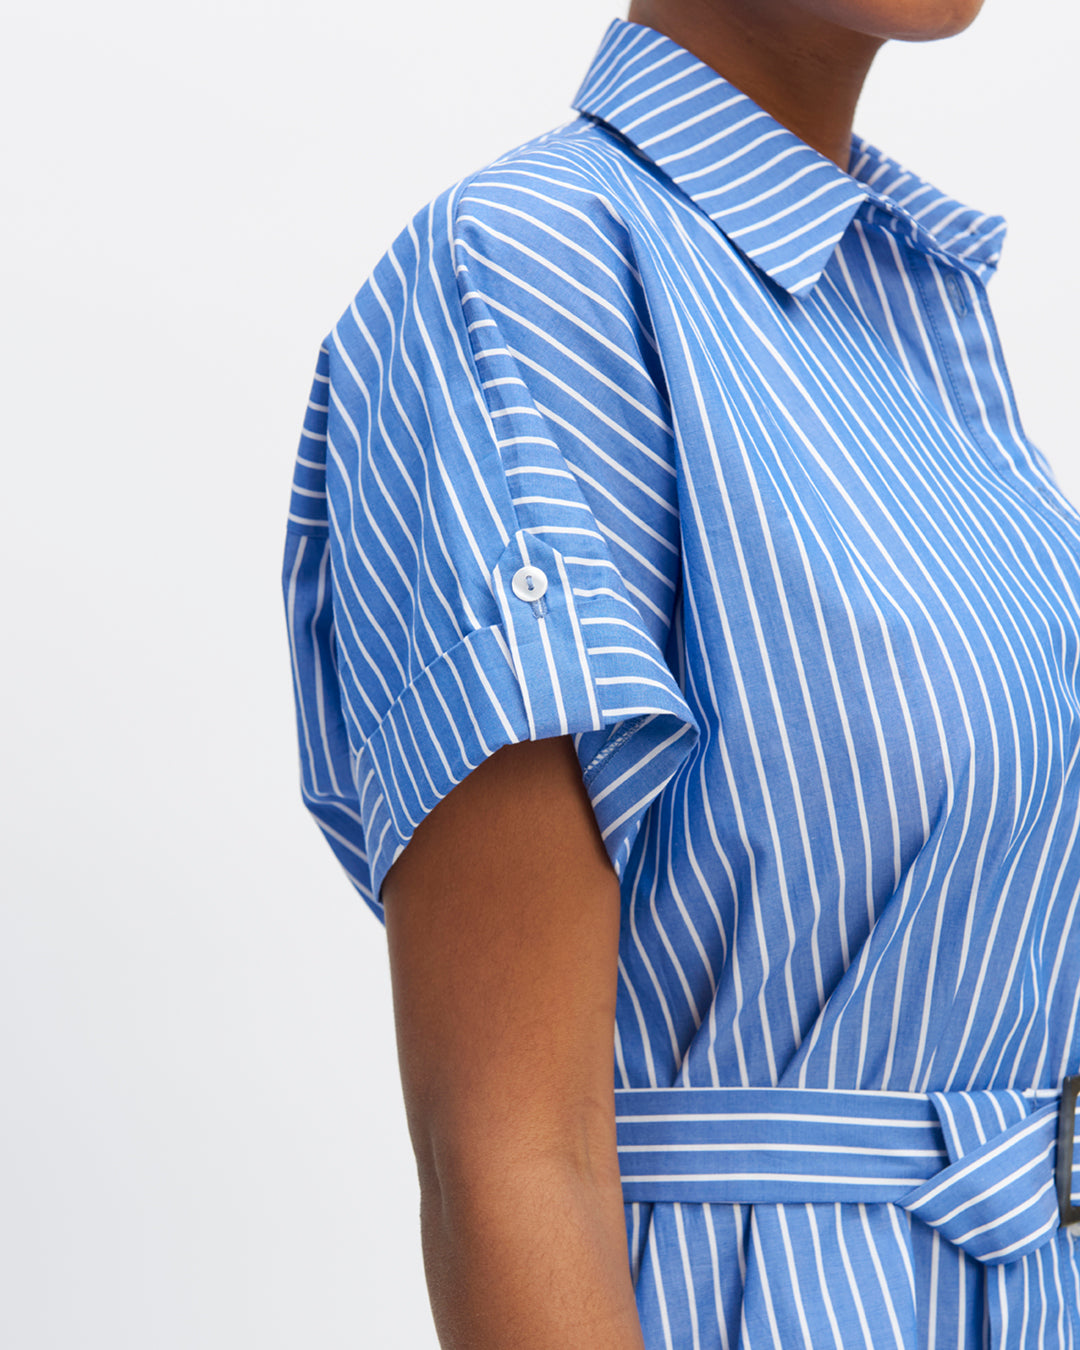 Blue-striped-dress-Fitted-cut-Collar-sweater-Short-sleeves-with-buttoned-crown-Button-plack-belt-with-buckle-17H10-tailors-for-women-paris-